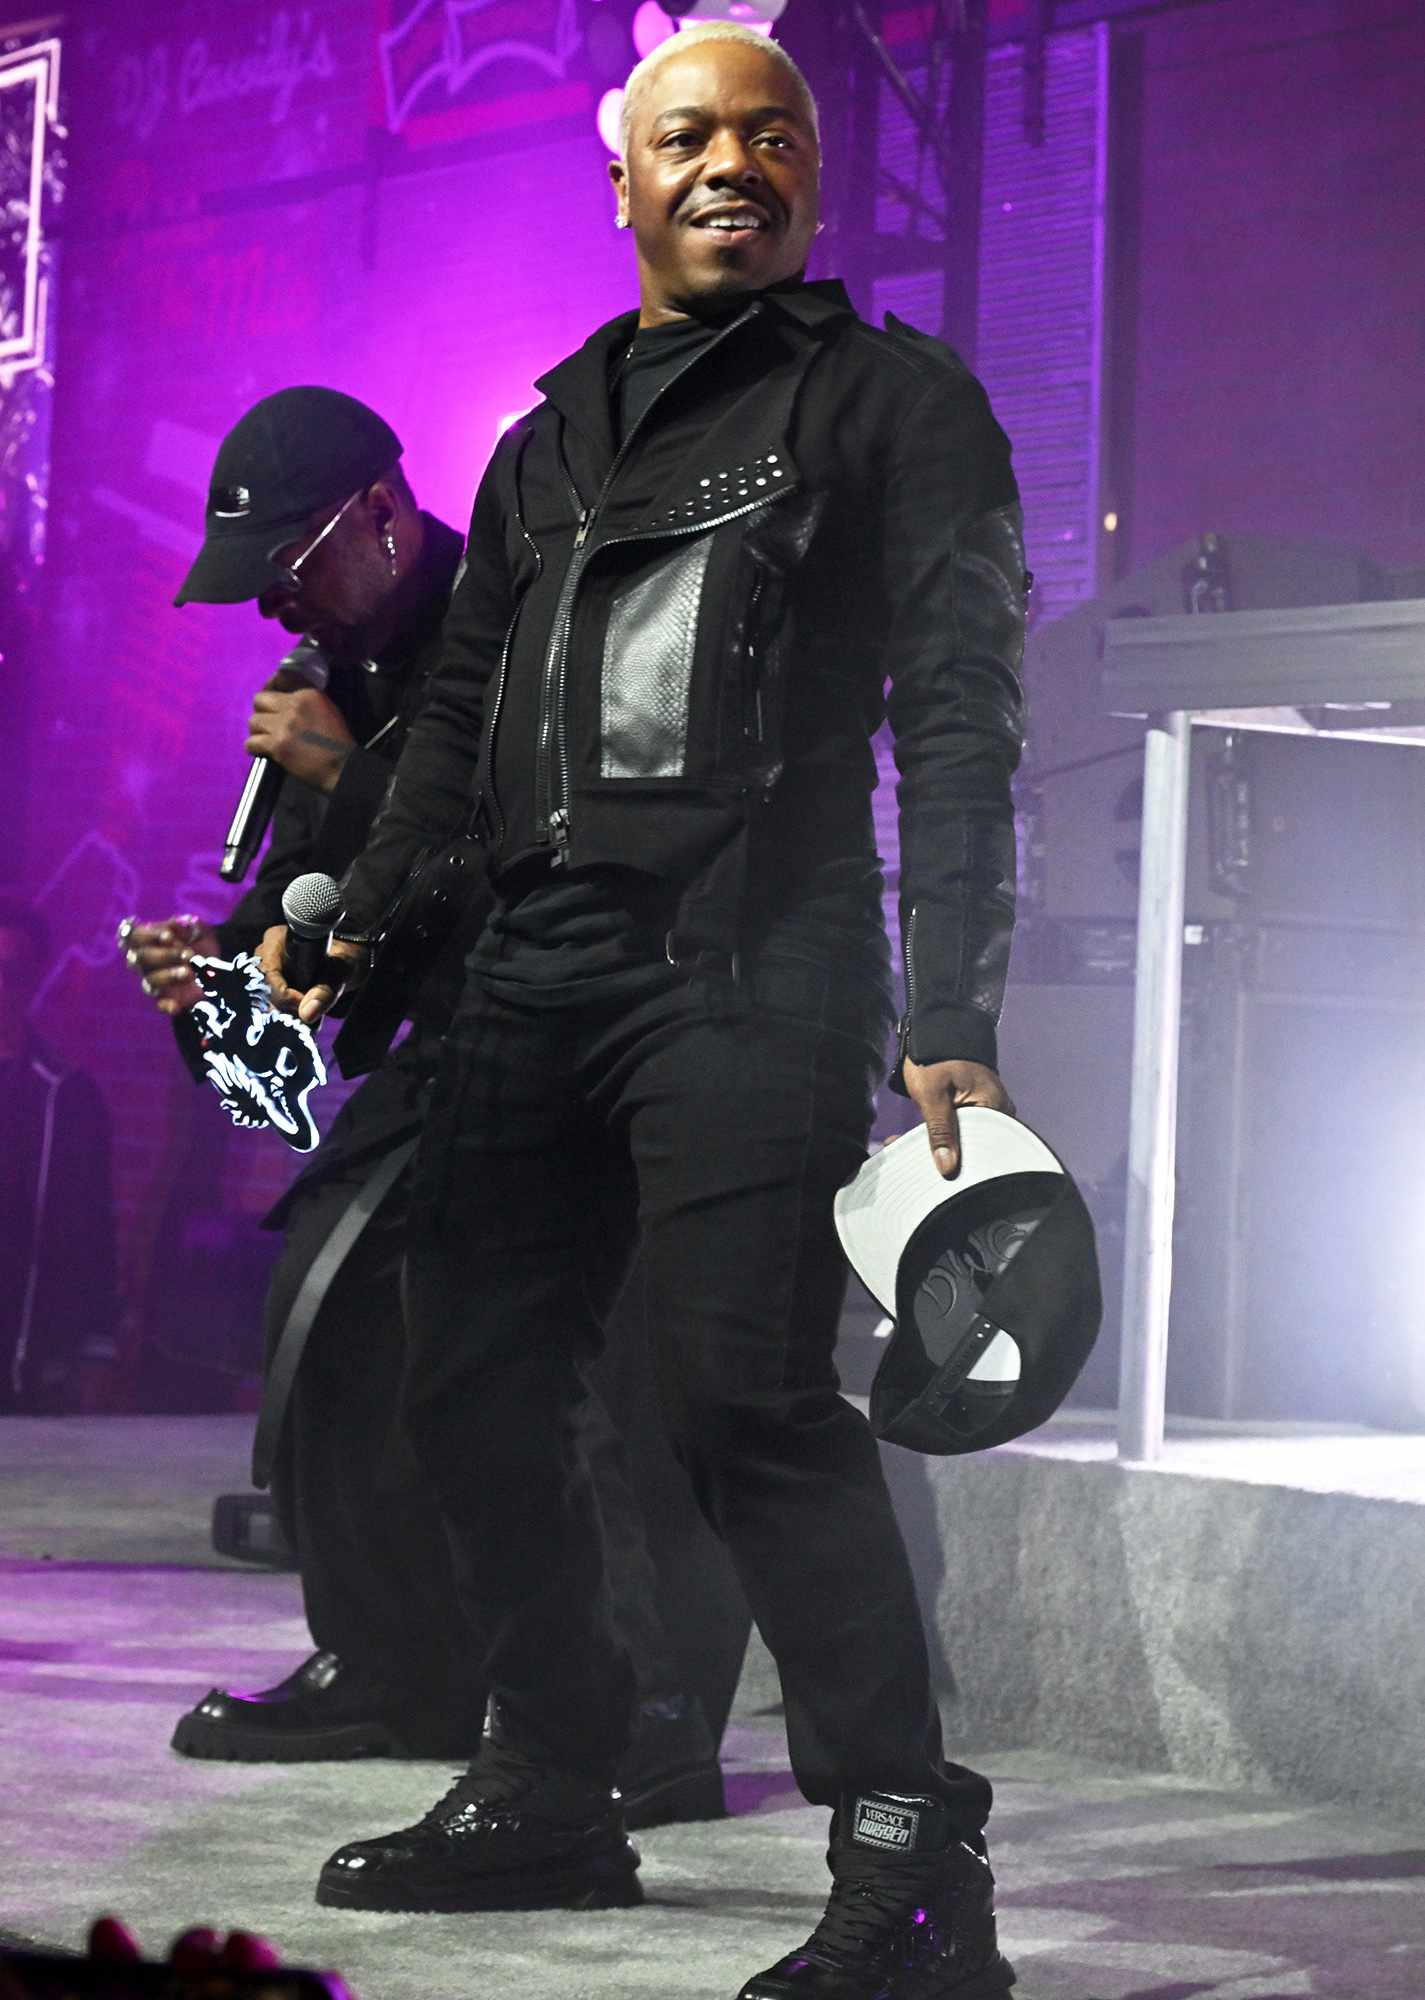 Sisqo performs onstage during City of Hope's 2023 Music, Film & Entertainment Industry Spirit of LifeÃÂ® Gala honoring Lyor Cohen, Global Head of Music at YouTube and Google at Pacific Design Center on October 18, 2023 in West Hollywood, California.